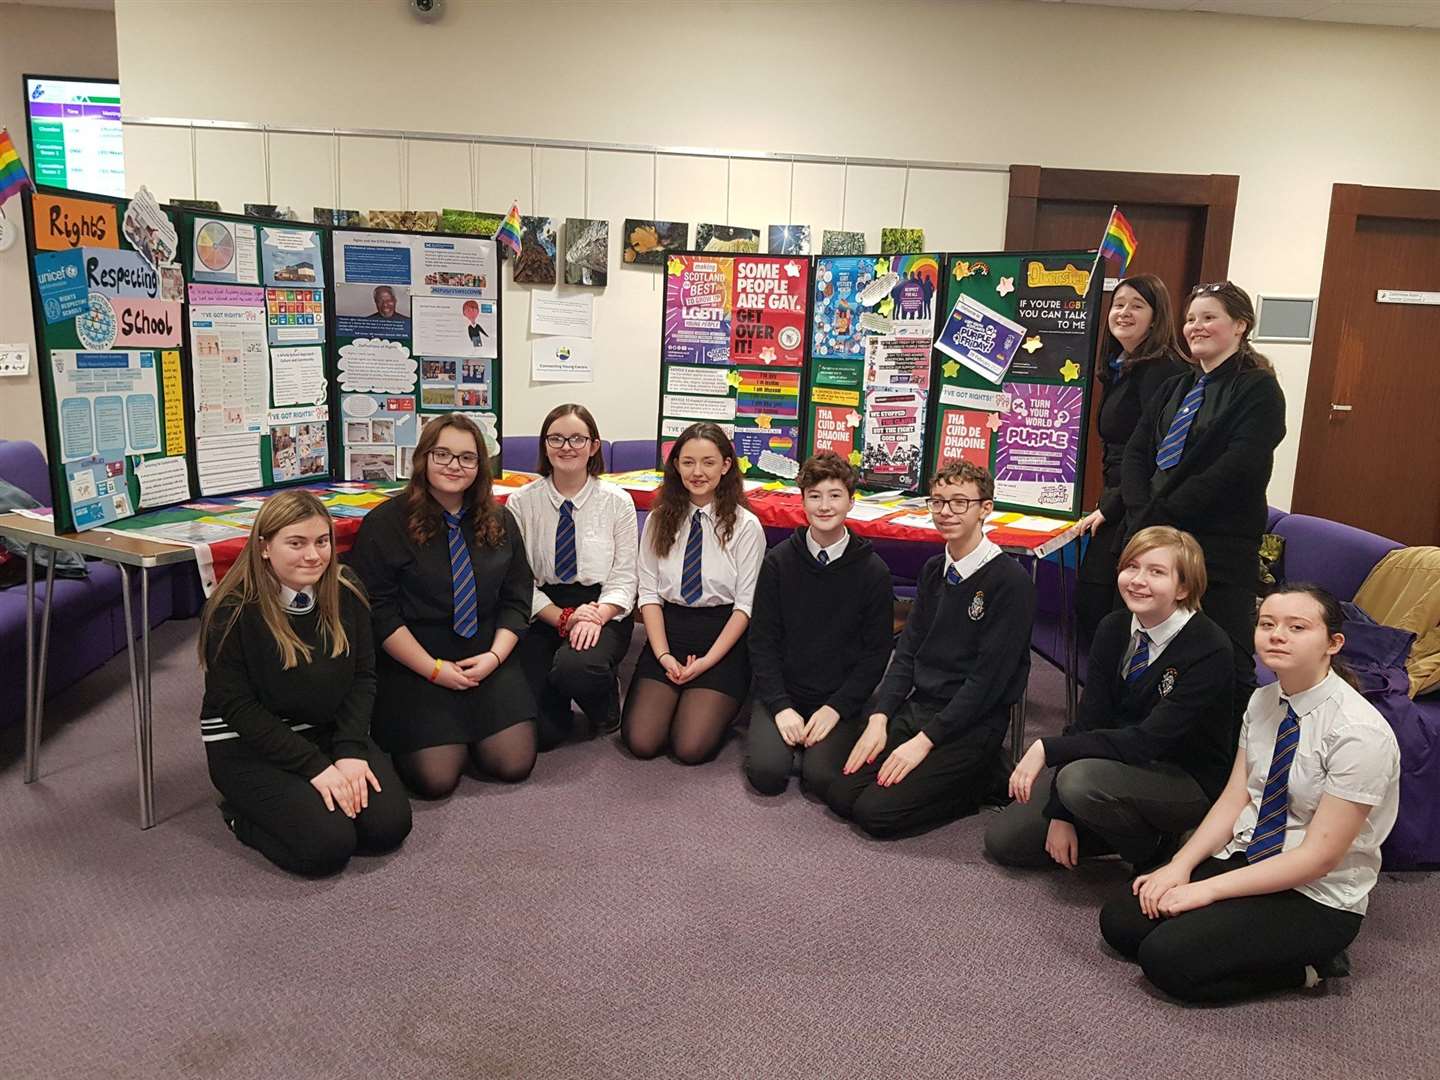 IRA pupils photographed with their Unicef display pre-Covid lockdown.